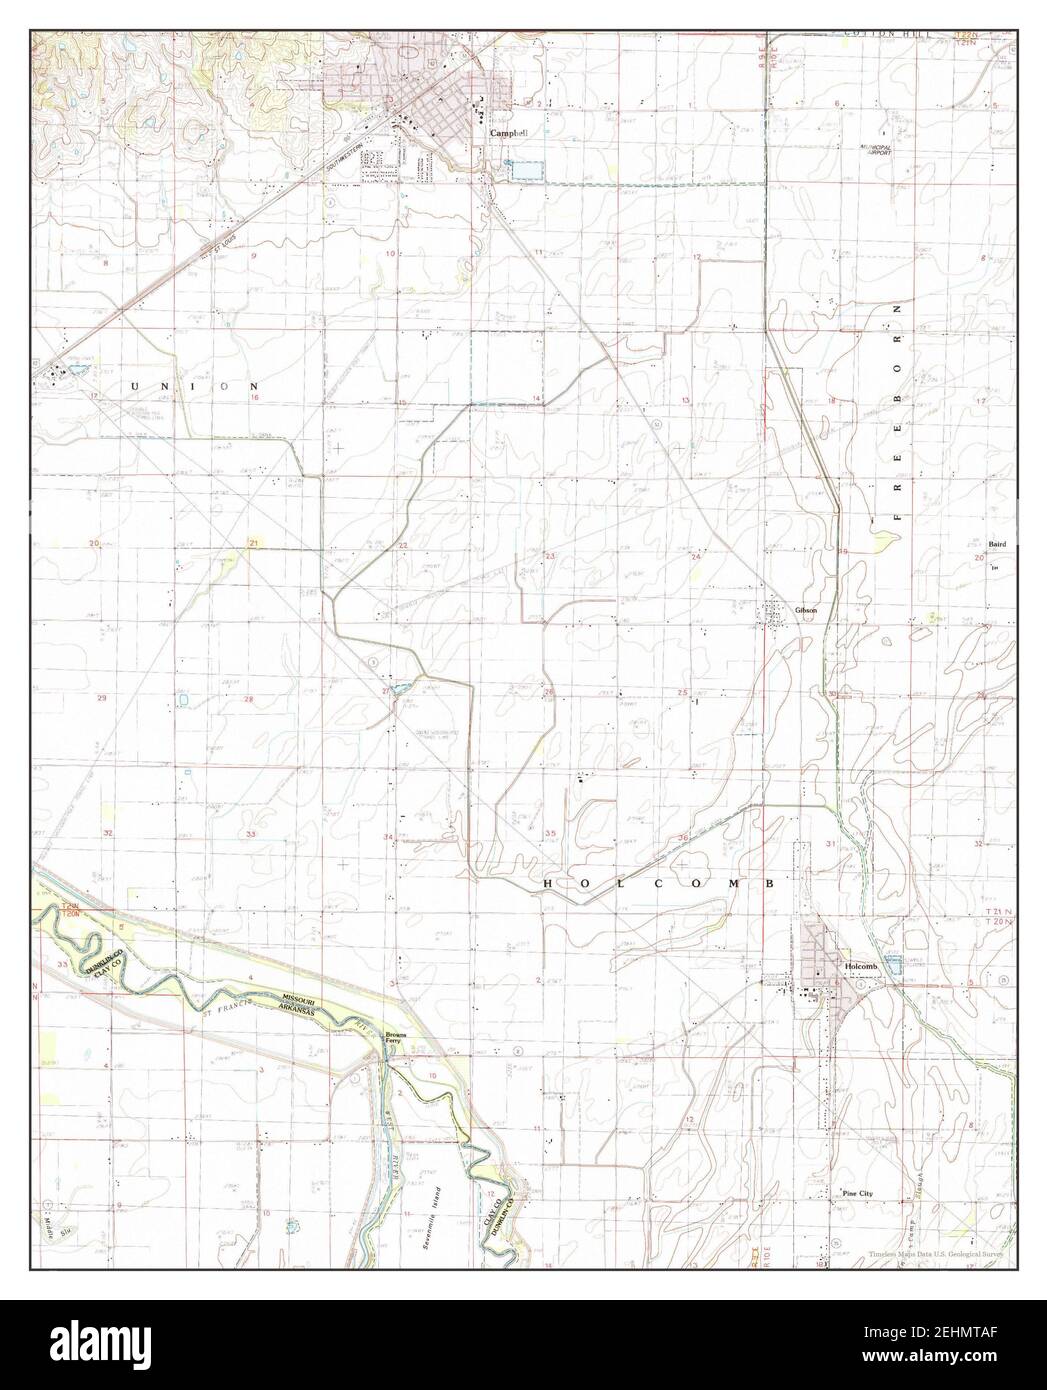 Campbell, Missouri, map 1984, 1:24000, United States of America by Timeless Maps, data U.S. Geological Survey Stock Photo